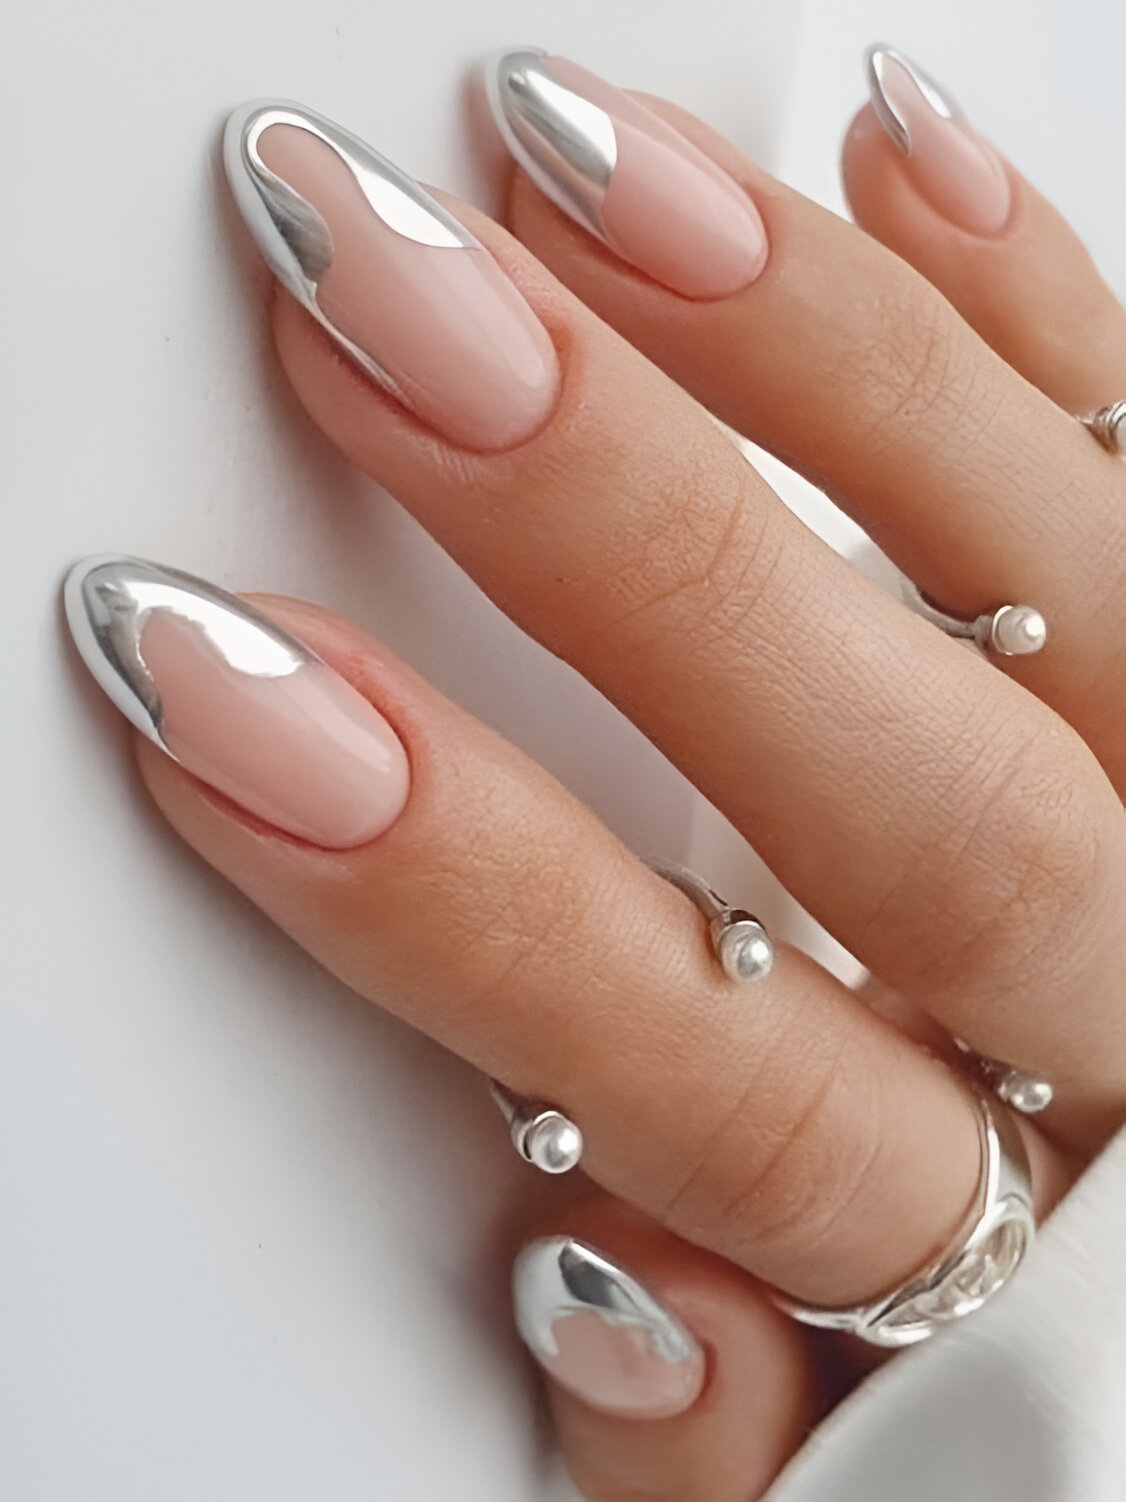 Modern French Tips